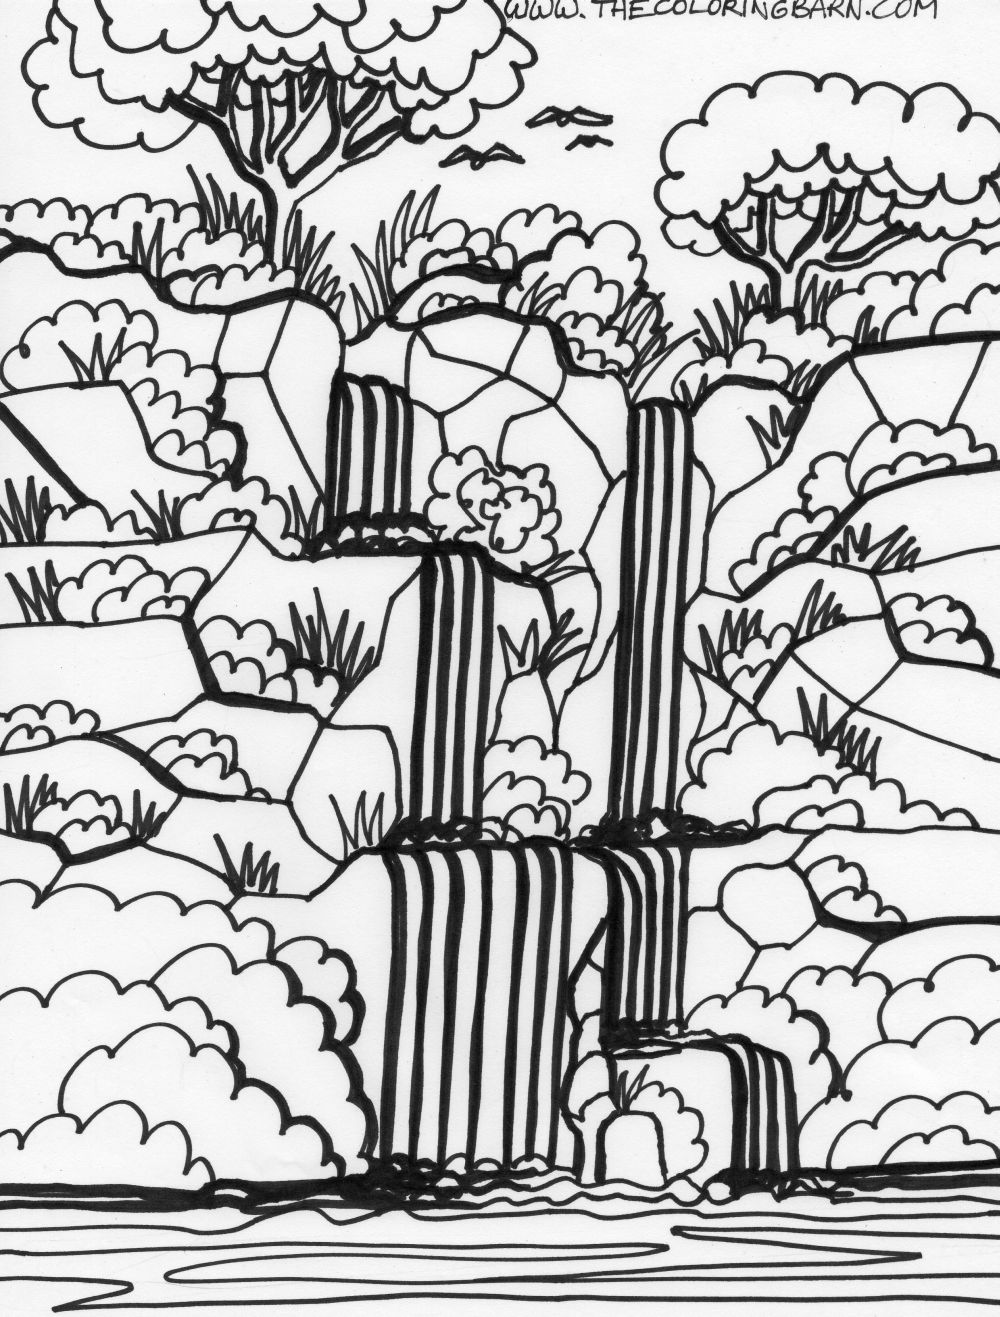 Coloring Pages for Kids: Waterfall Coloring Pages for Kids